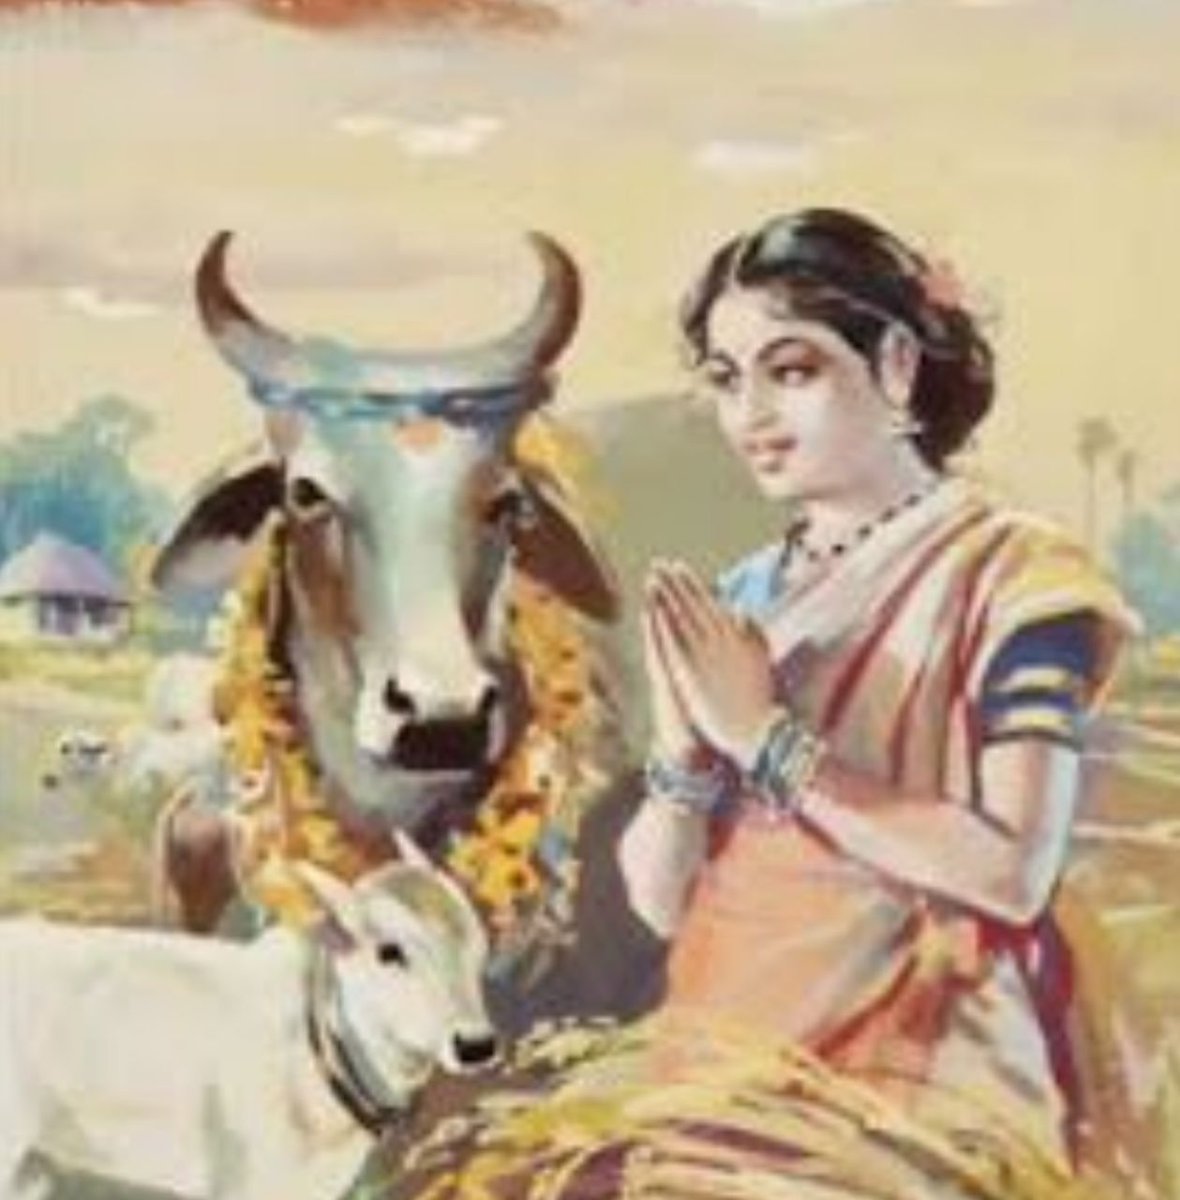 State legislatures such as those of Uttar Pradesh, Bihar, Rajasthan and Madhya Pradesh enacted their own laws in the 1950s.The Congress leaders of those days refused to say that India will be considered as backward in the modern day world if they support cow slaughter ban.